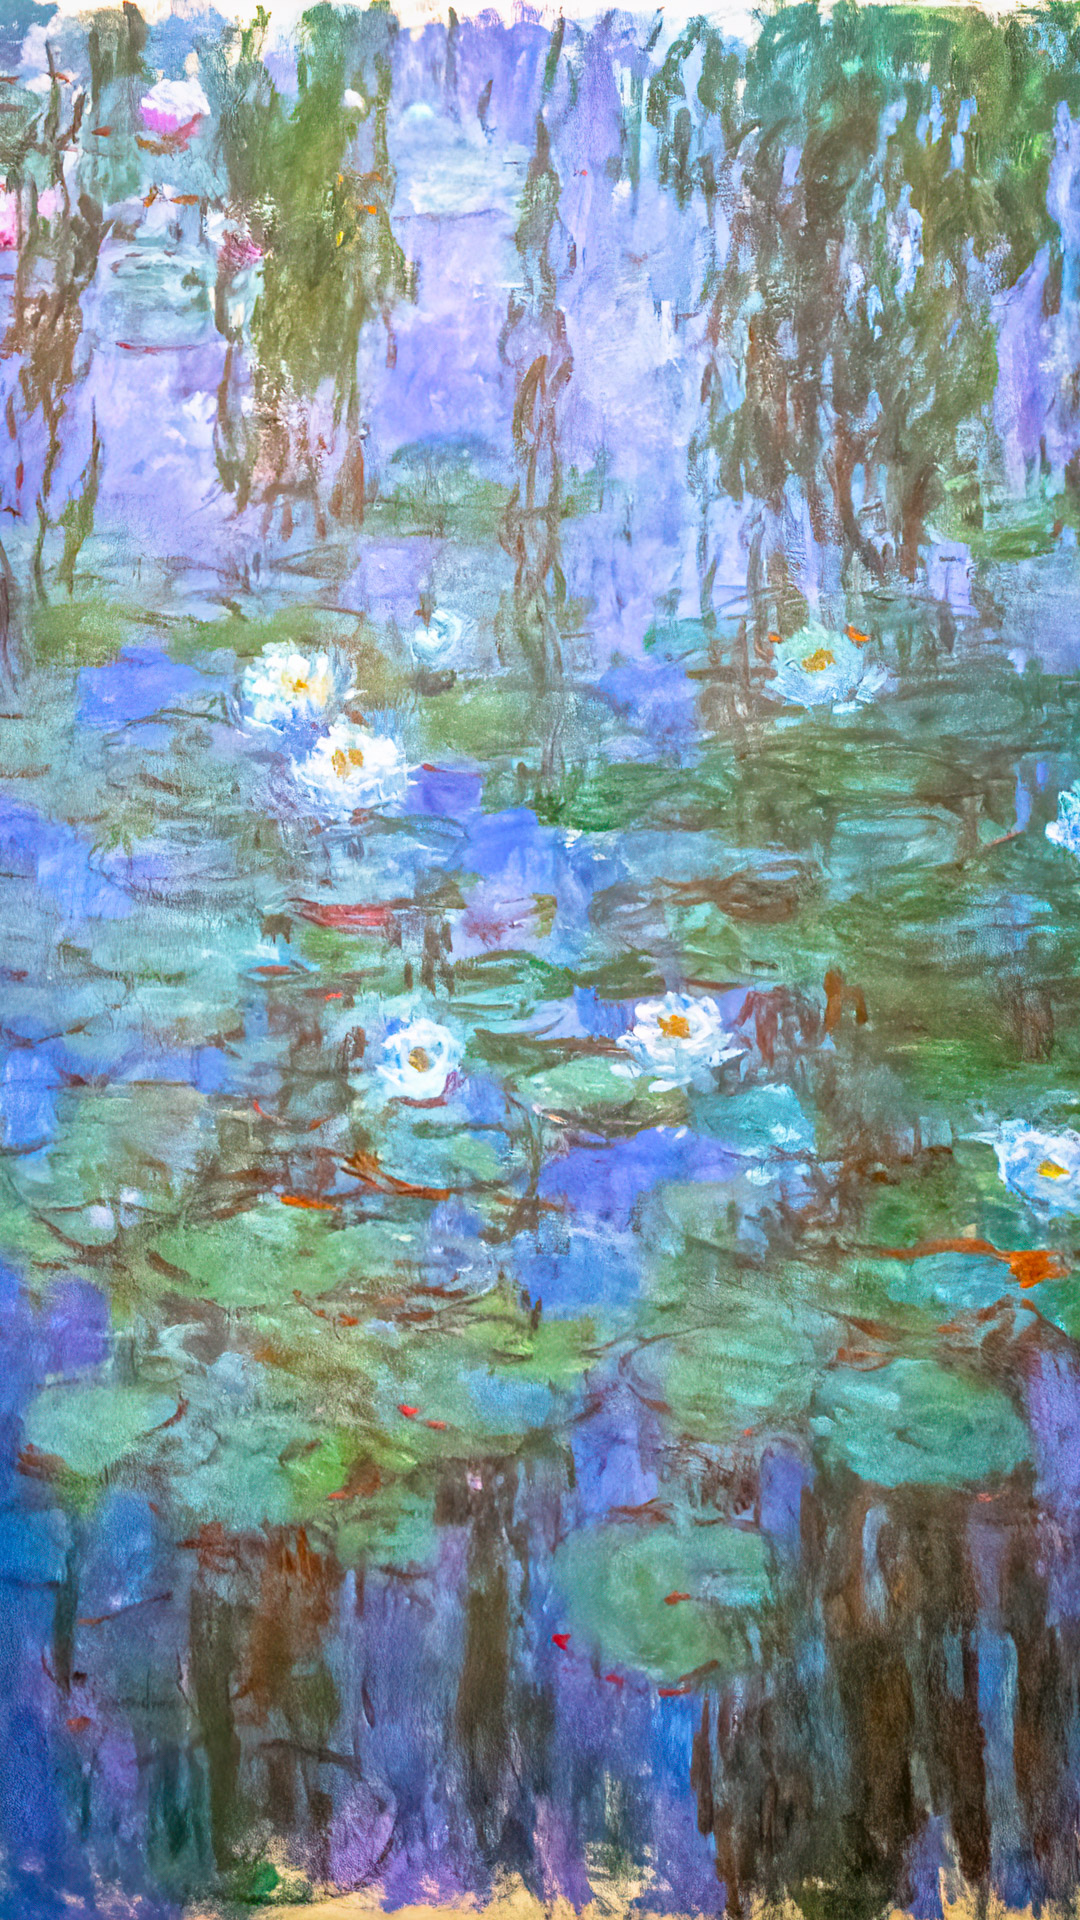 Dive into the mesmerizing painting wallpaper of Monet's water lily pond, where vibrant colors and delicate reflections create a tranquil ambiance.